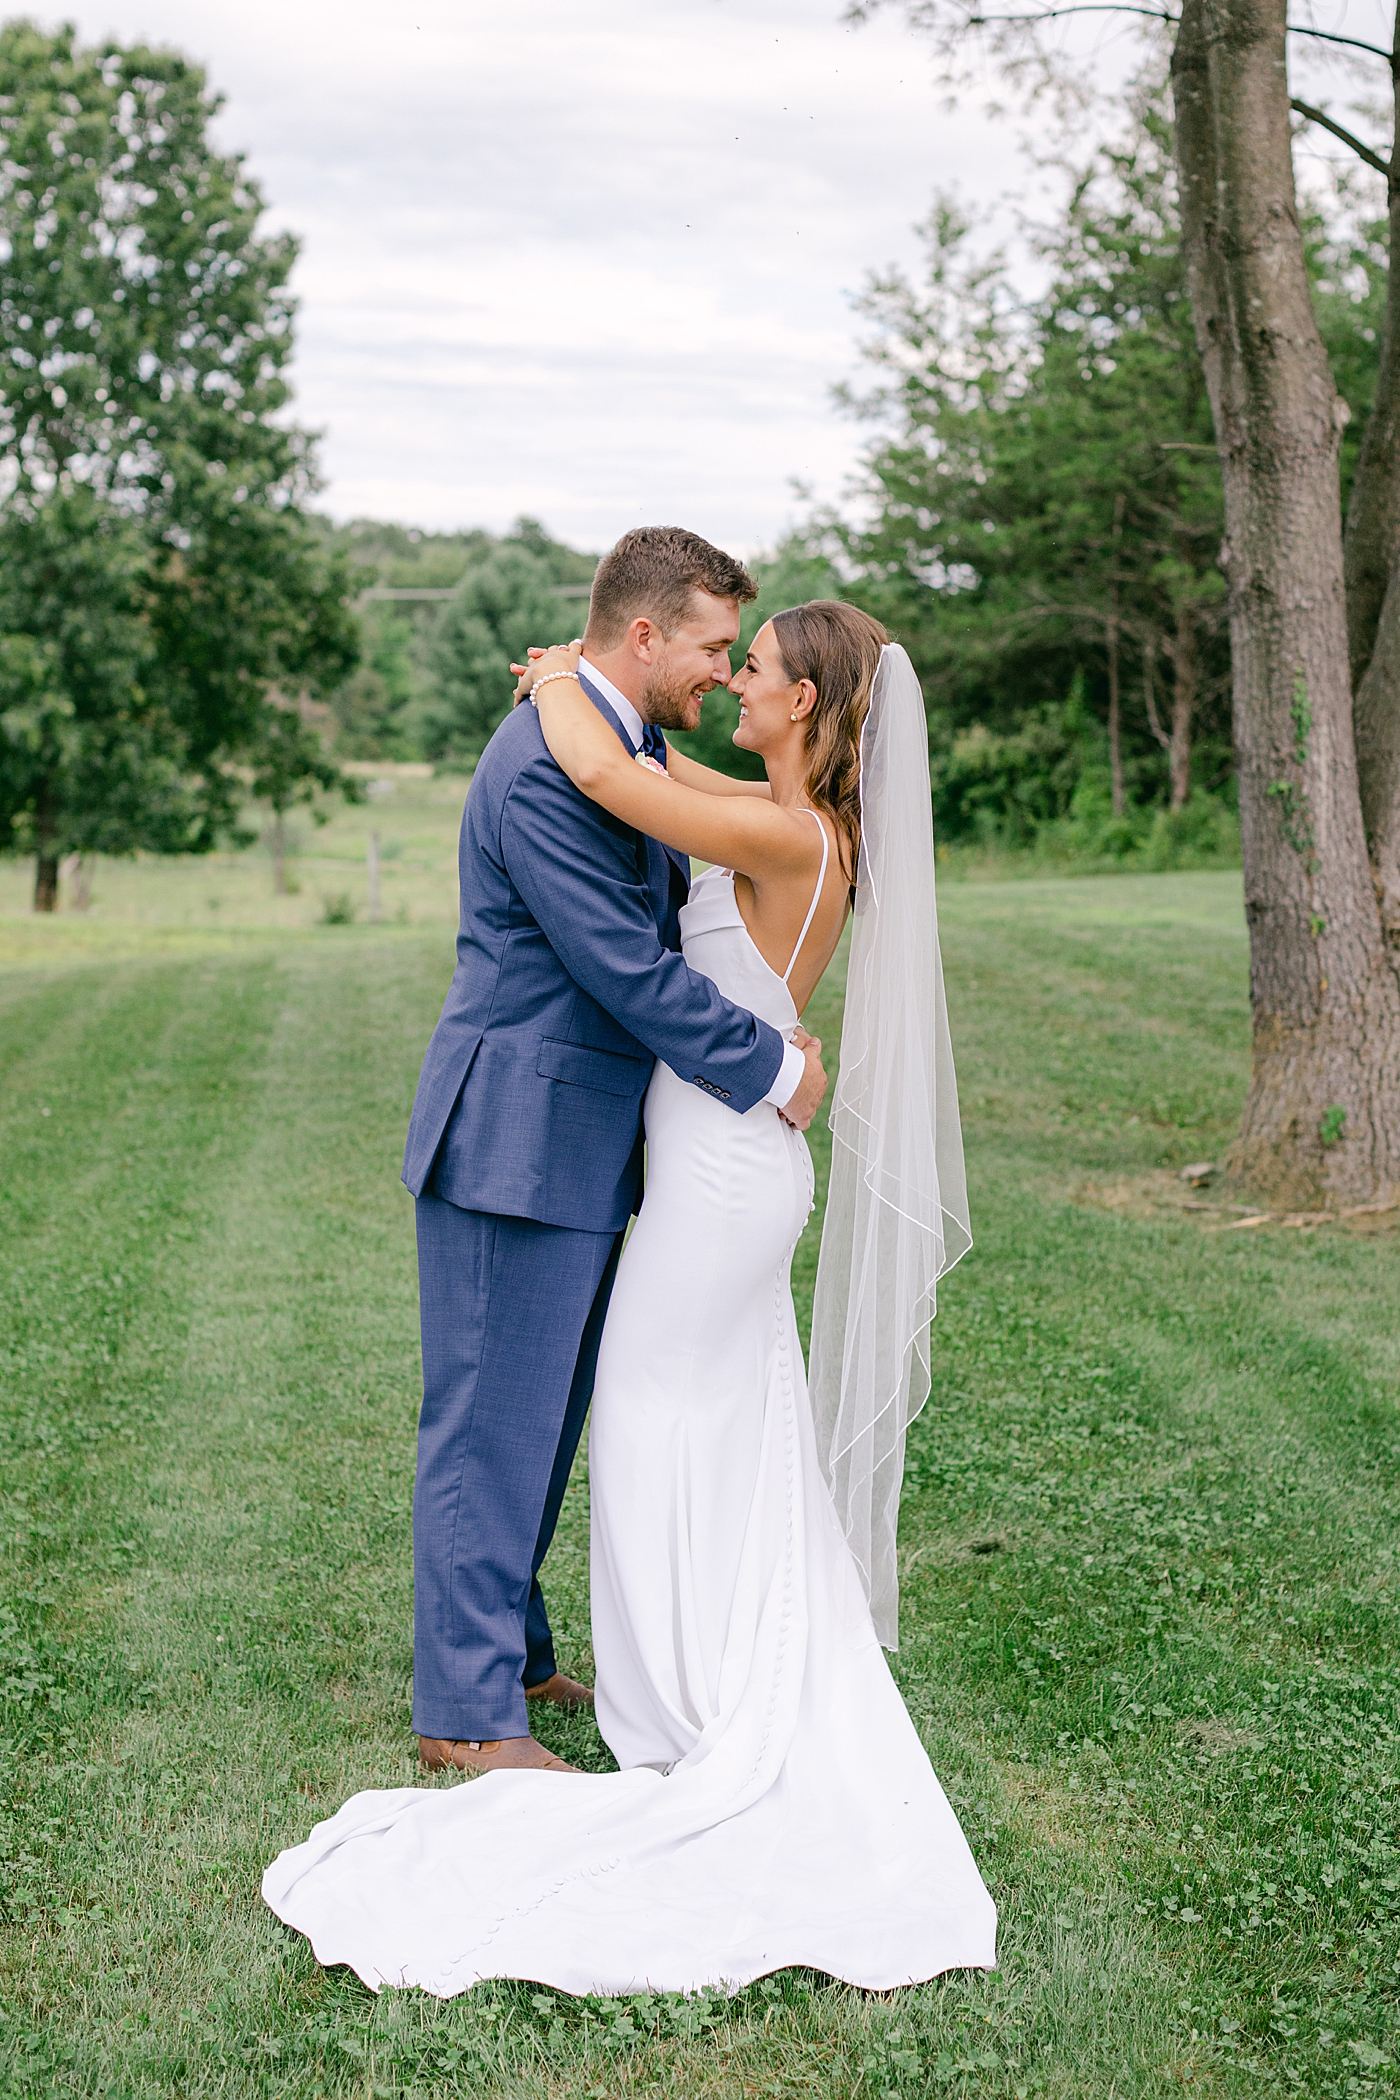 Bride and groom embracing during portraits | Image by Hope Helmuth Photography